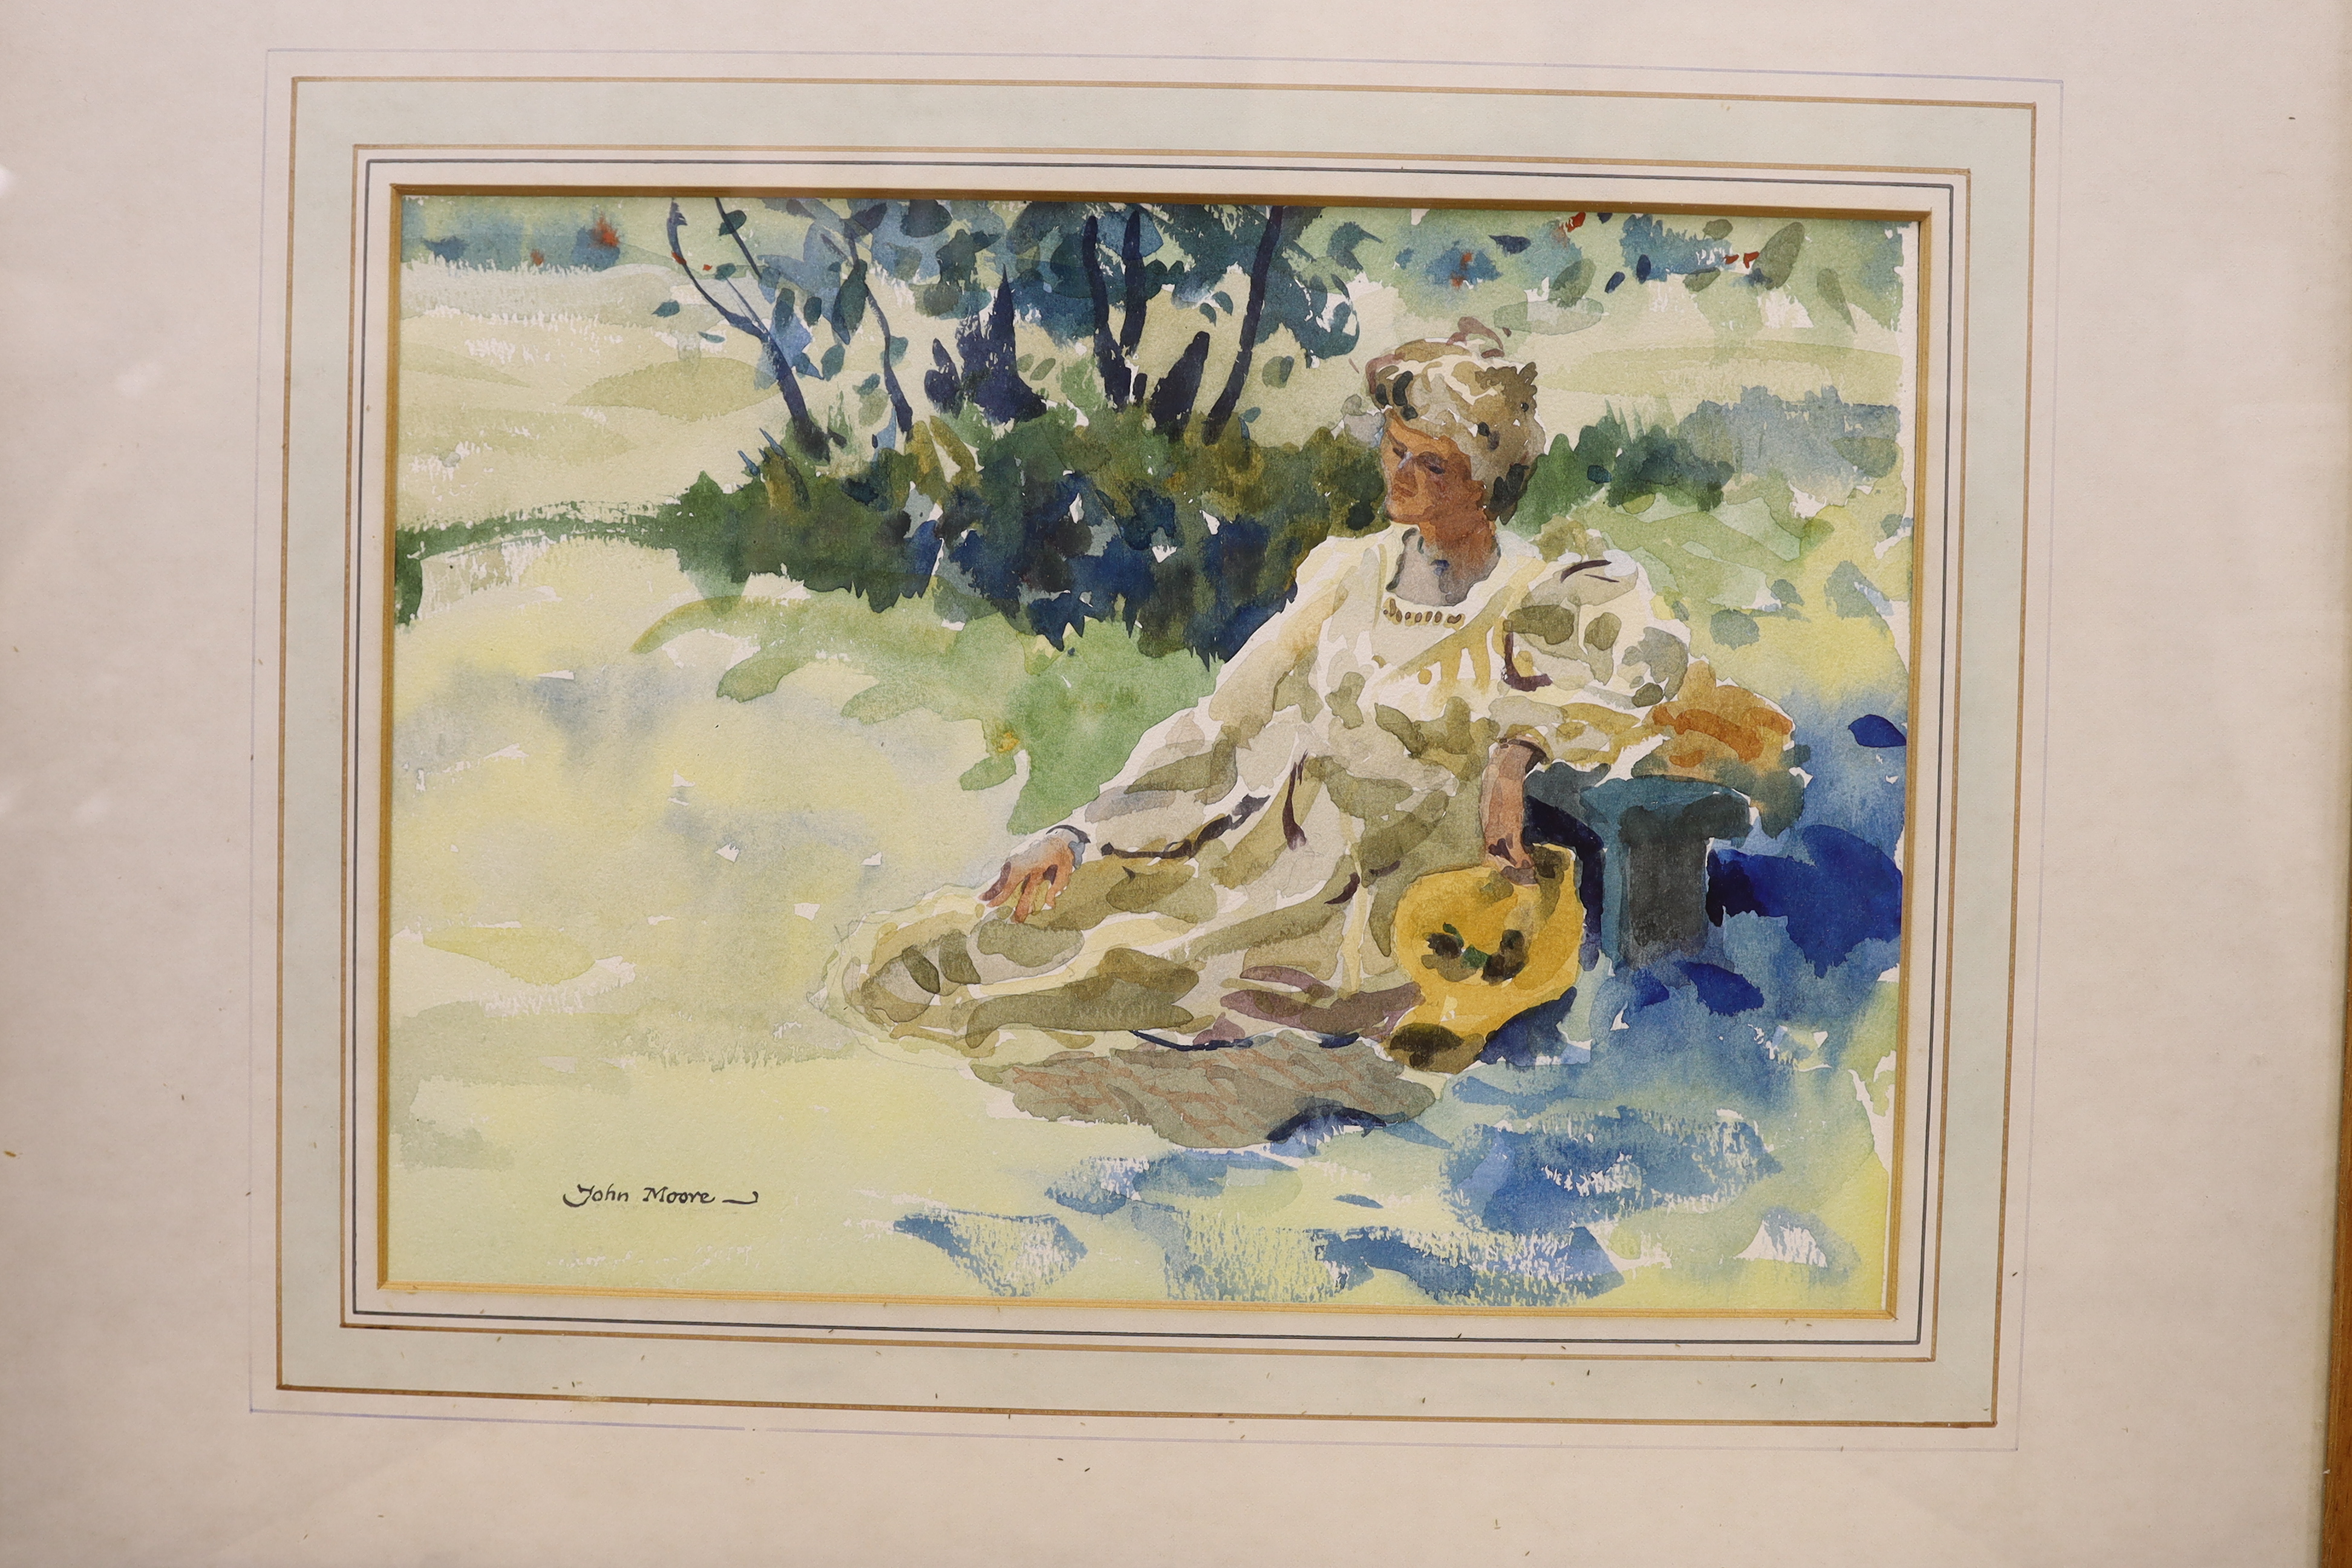 Rear Admiral Humfrey John Bradley Moore, CBE, RI (British, 1898-1985), four watercolours, Mediterranean views and study of a woman seated in a meadow, each signed, largest 26 x 35cm